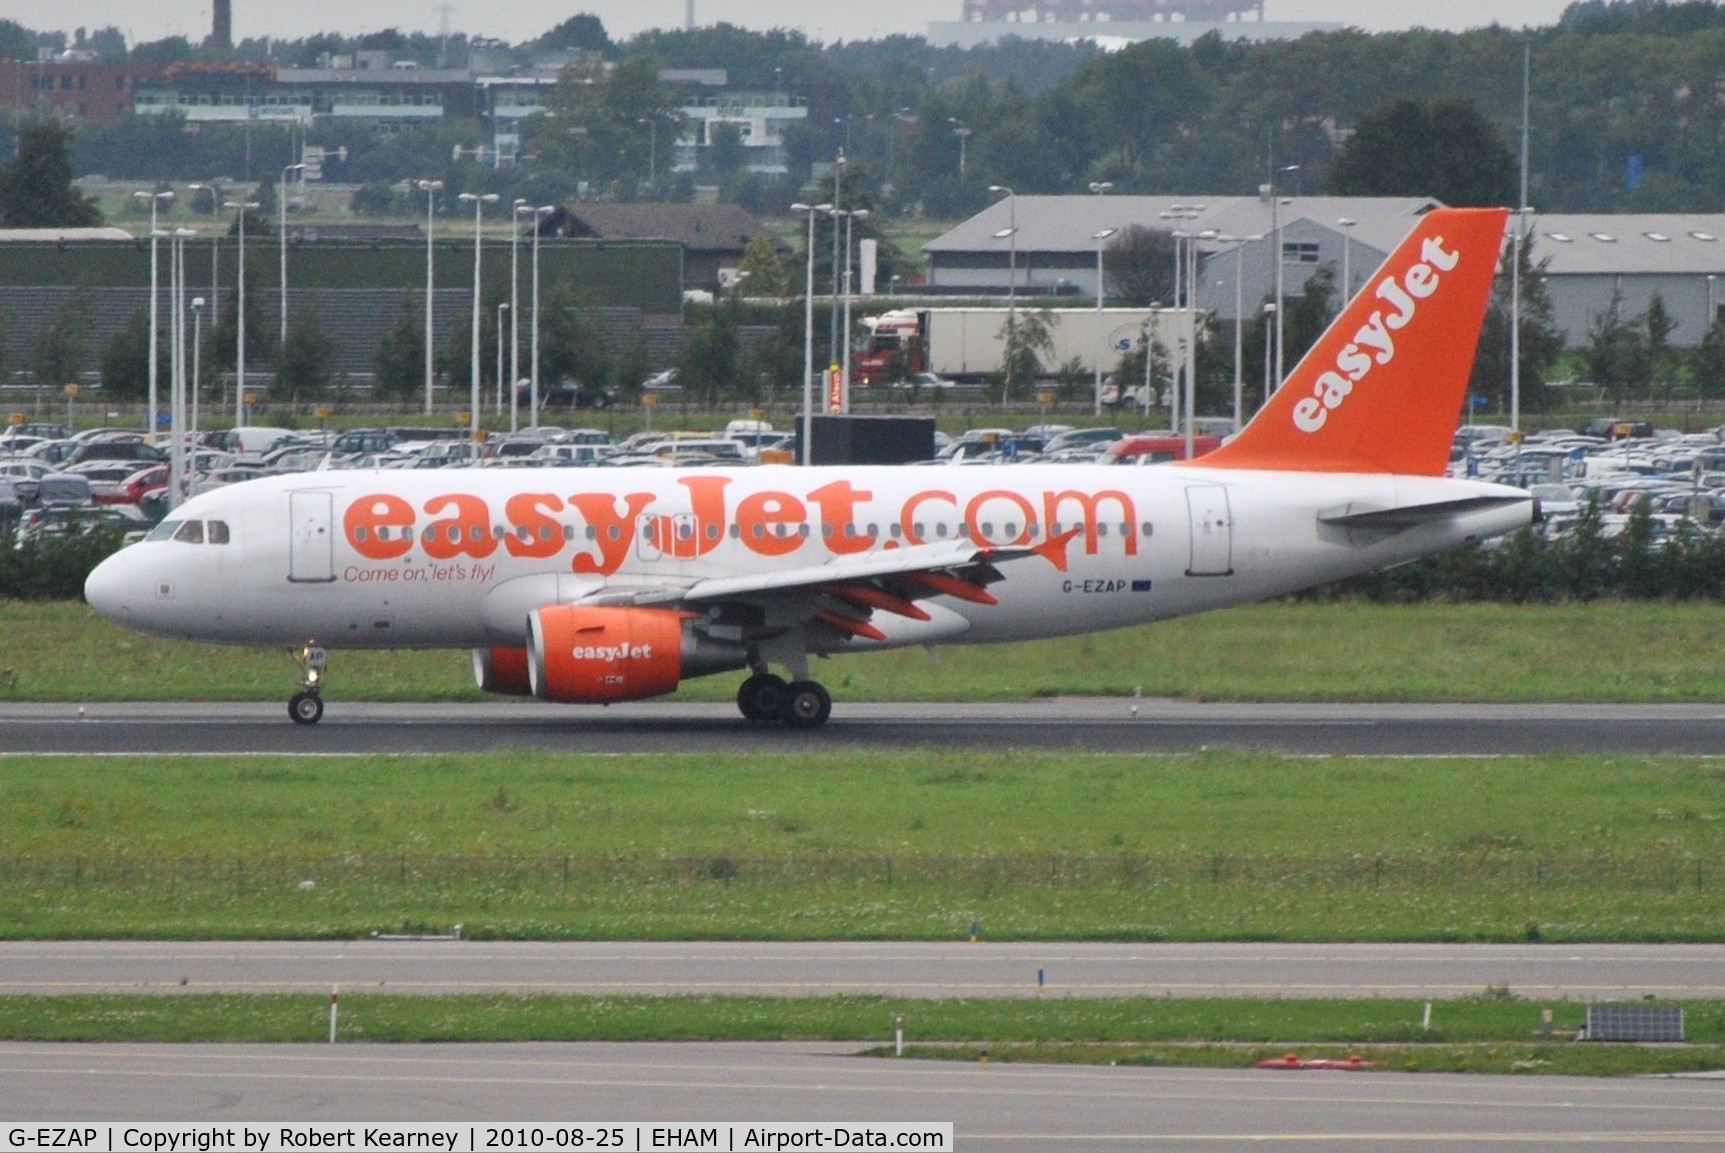 G-EZAP, 2006 Airbus A319-111 C/N 2777, EasyJet taxiing for departure